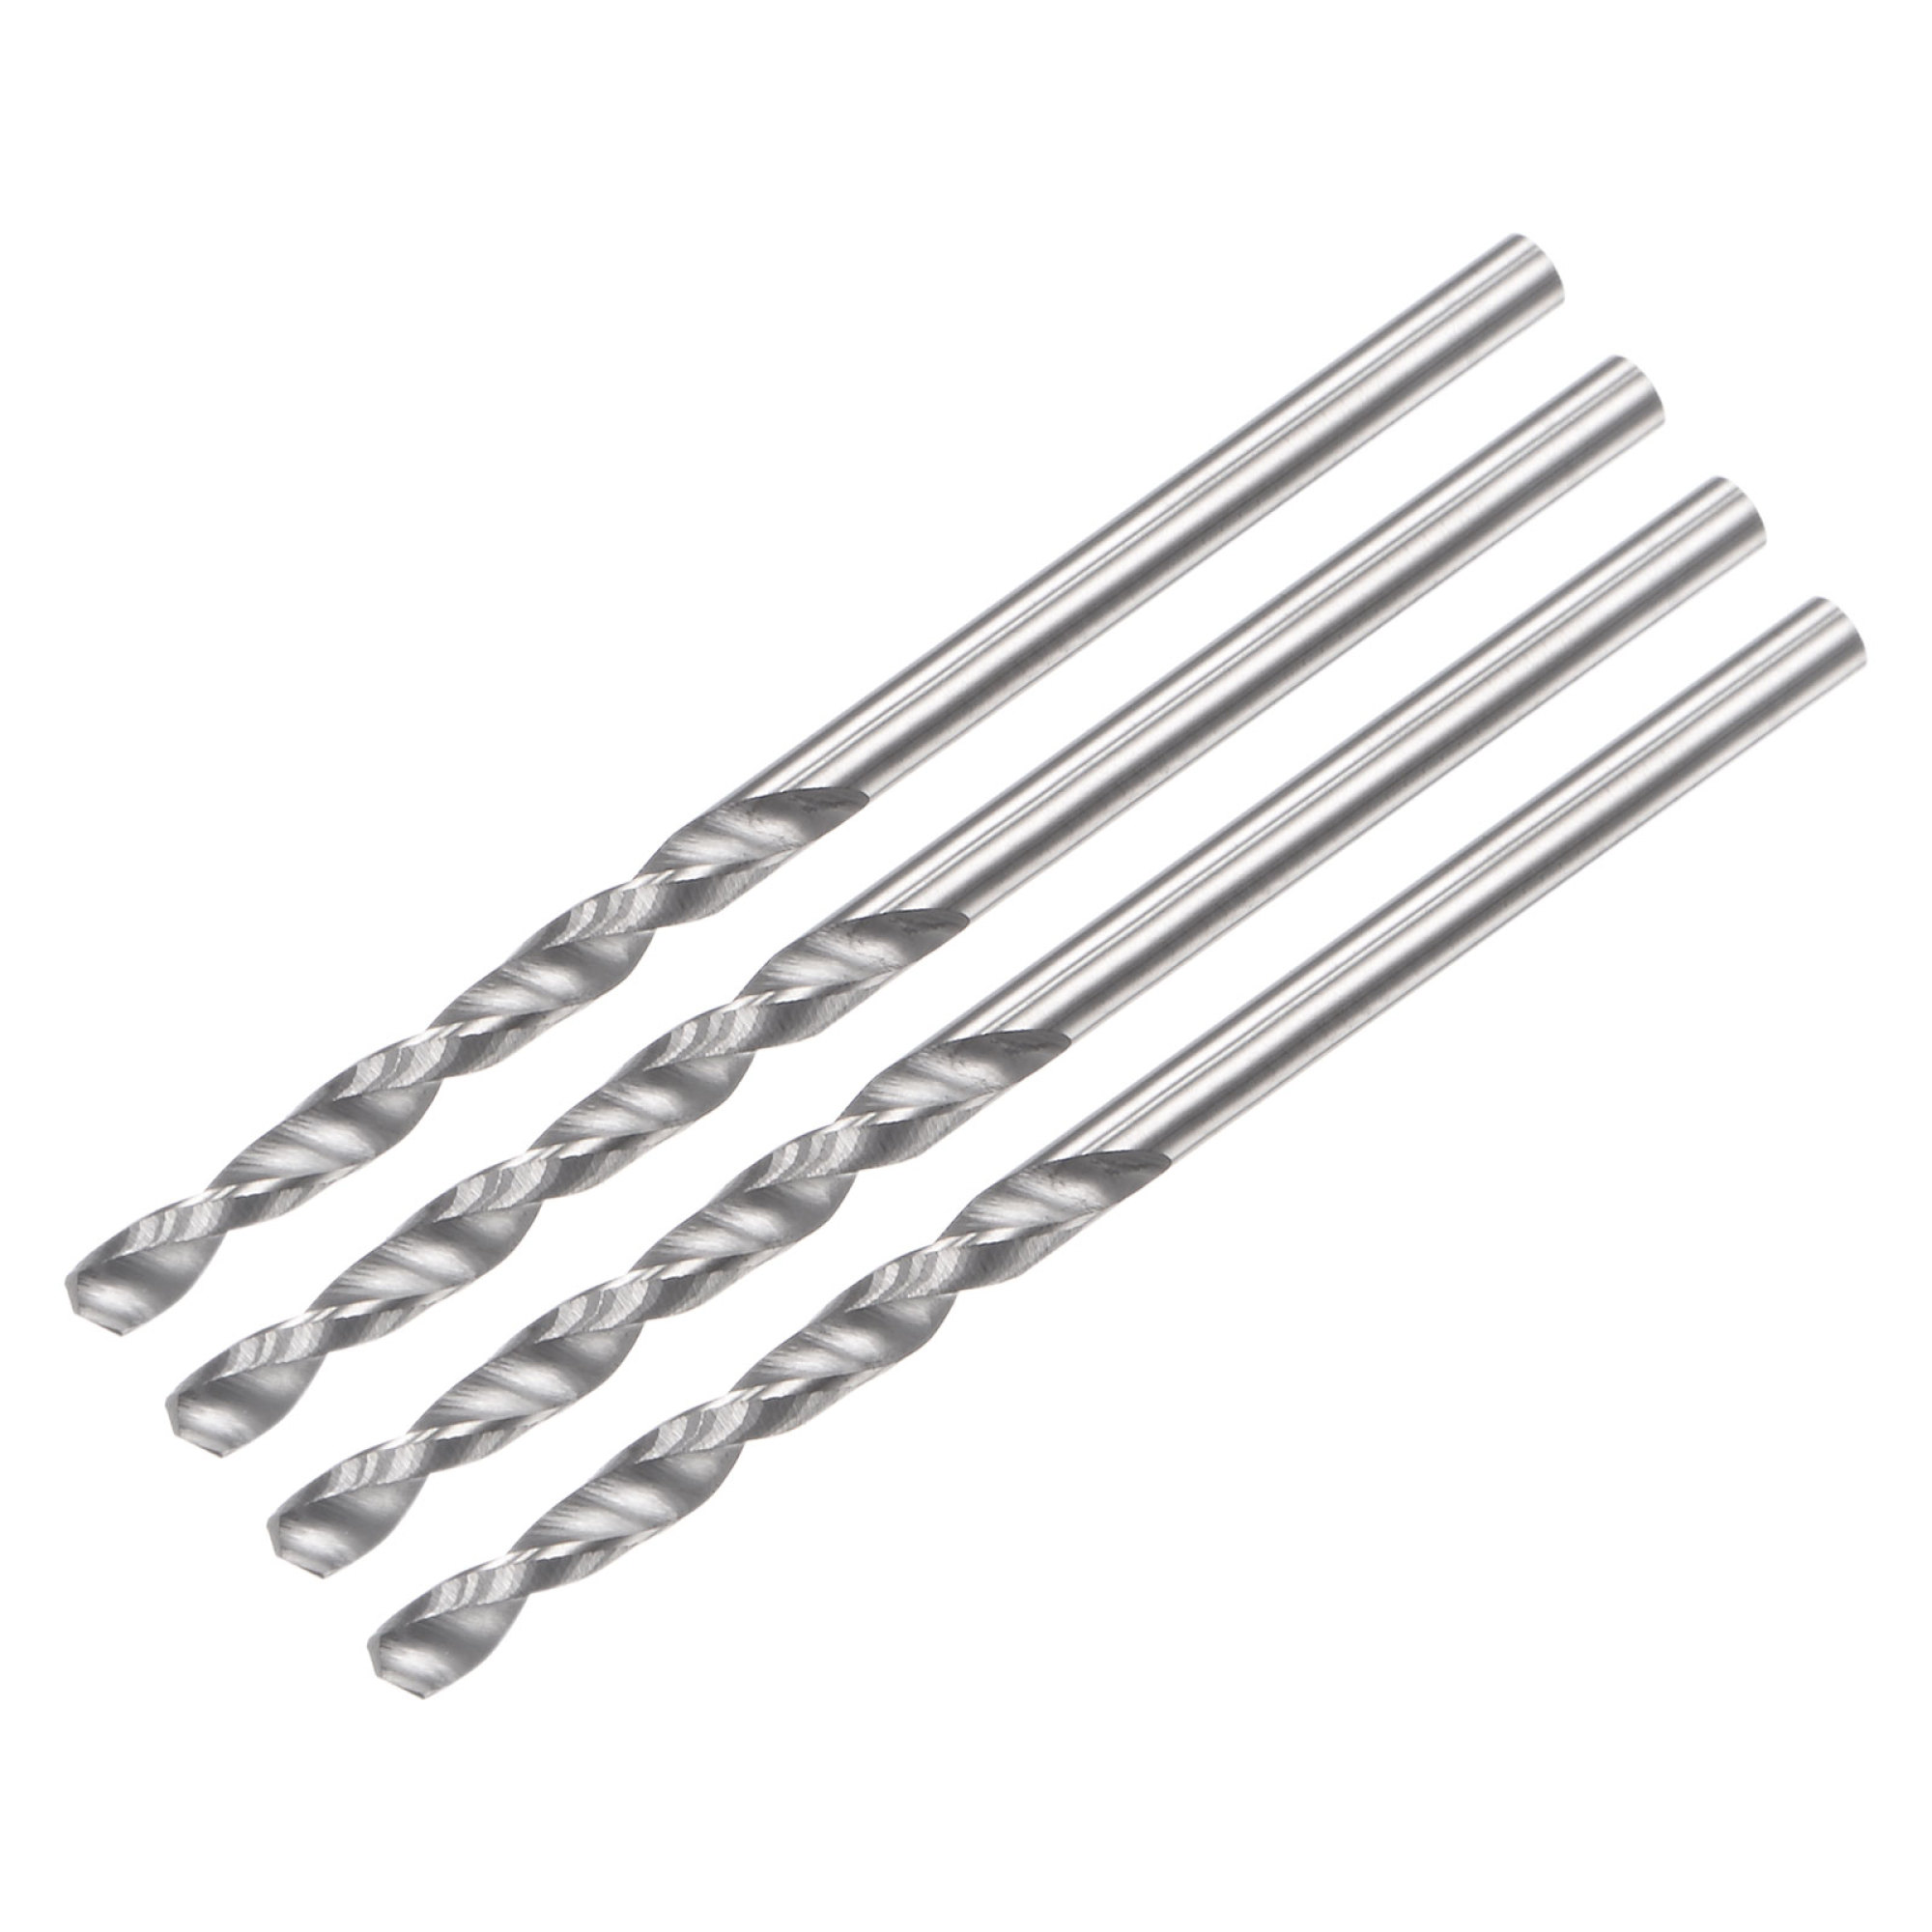 4pcs C2/K20 Solid Drill Bits, Straight Shank for Metal